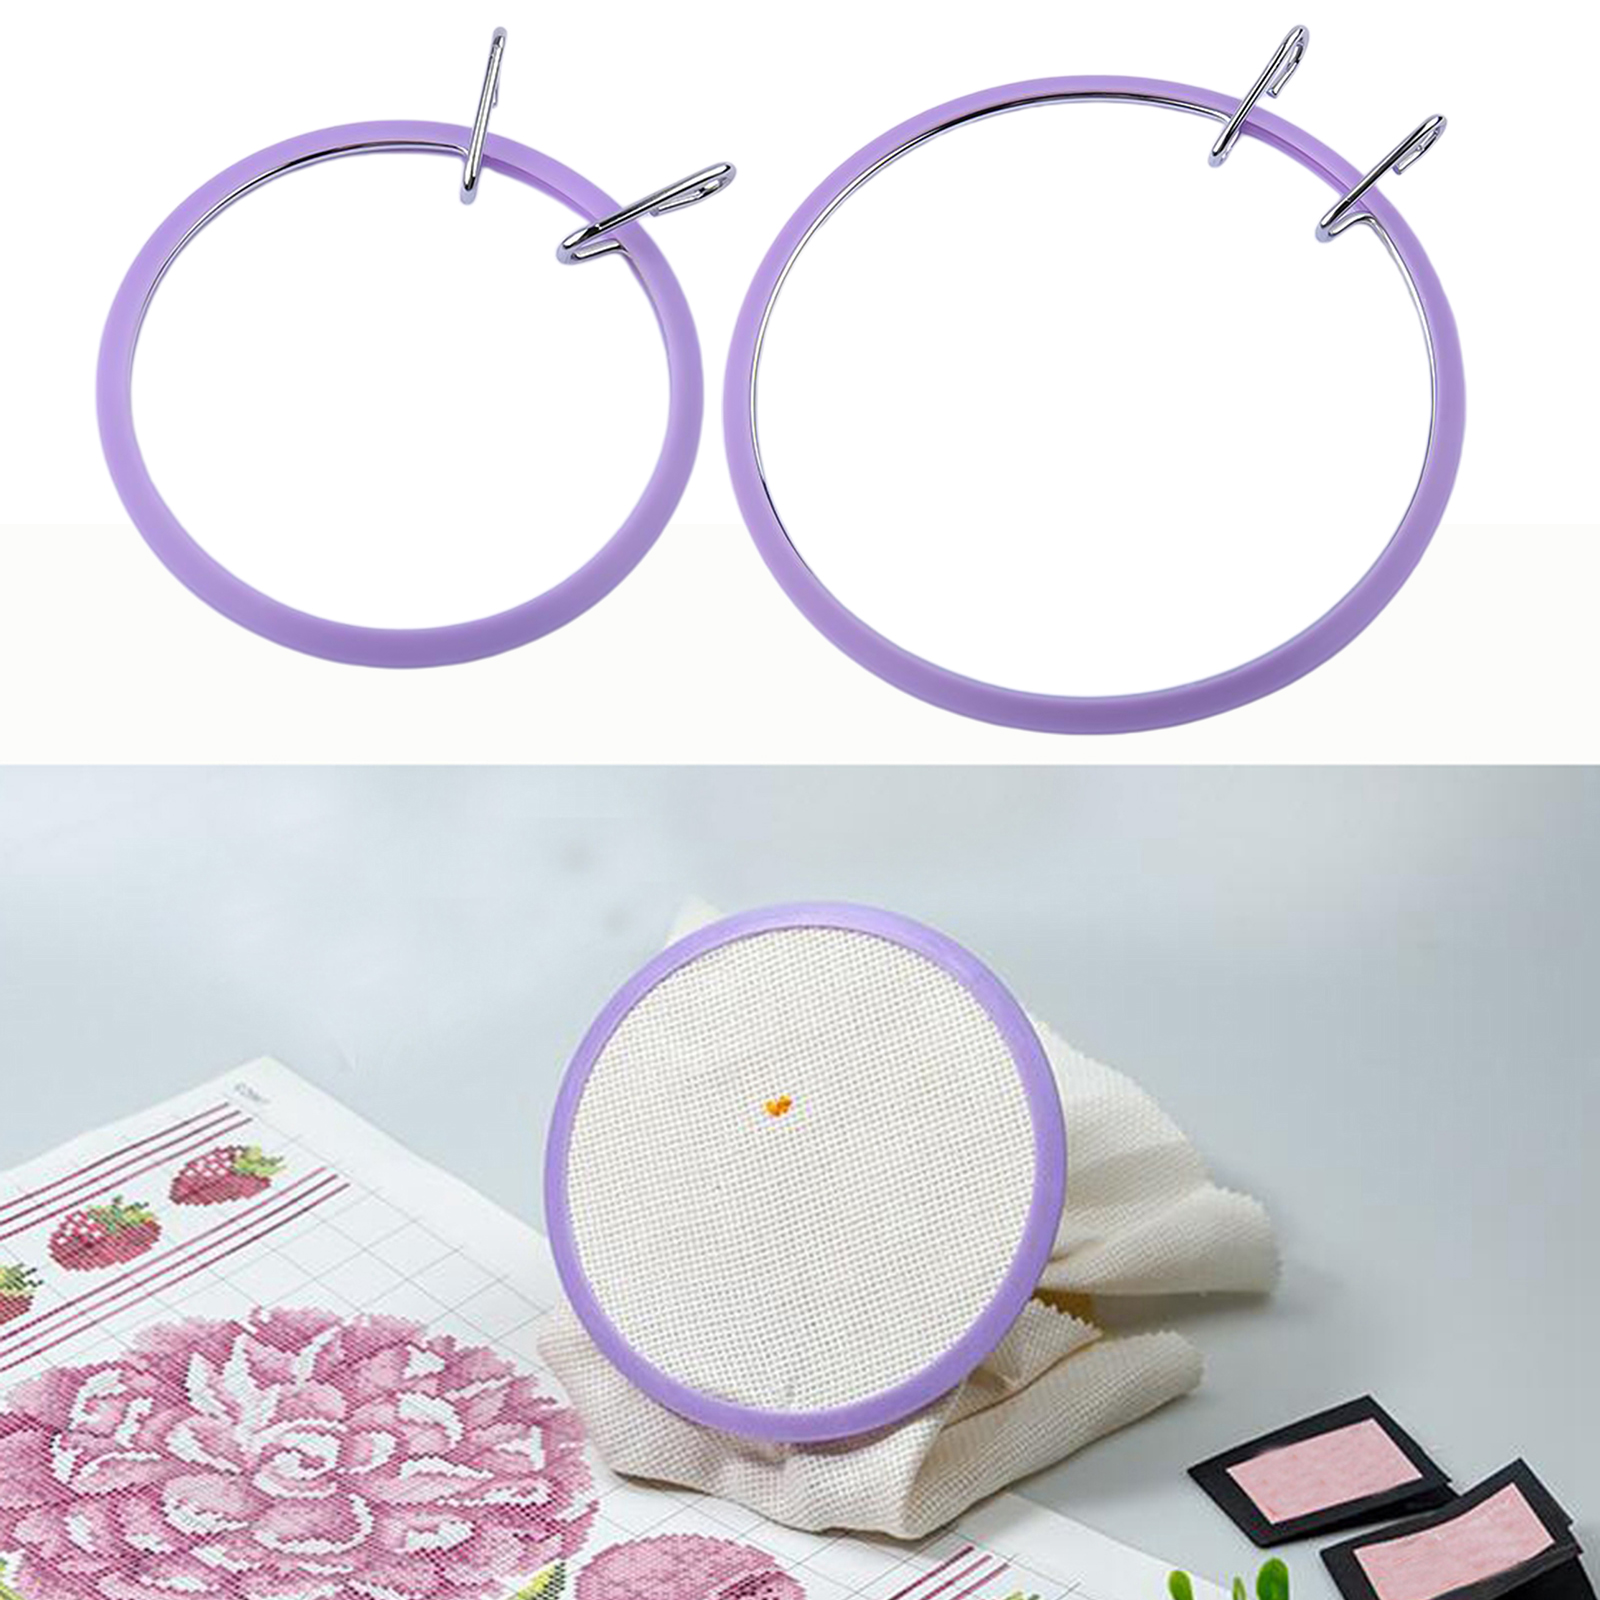 Spring Tension Embroidery Hoop Tool Manual Accessories Embroidery Frame Circle Art Craft Cross Stitch Sewing Supplies